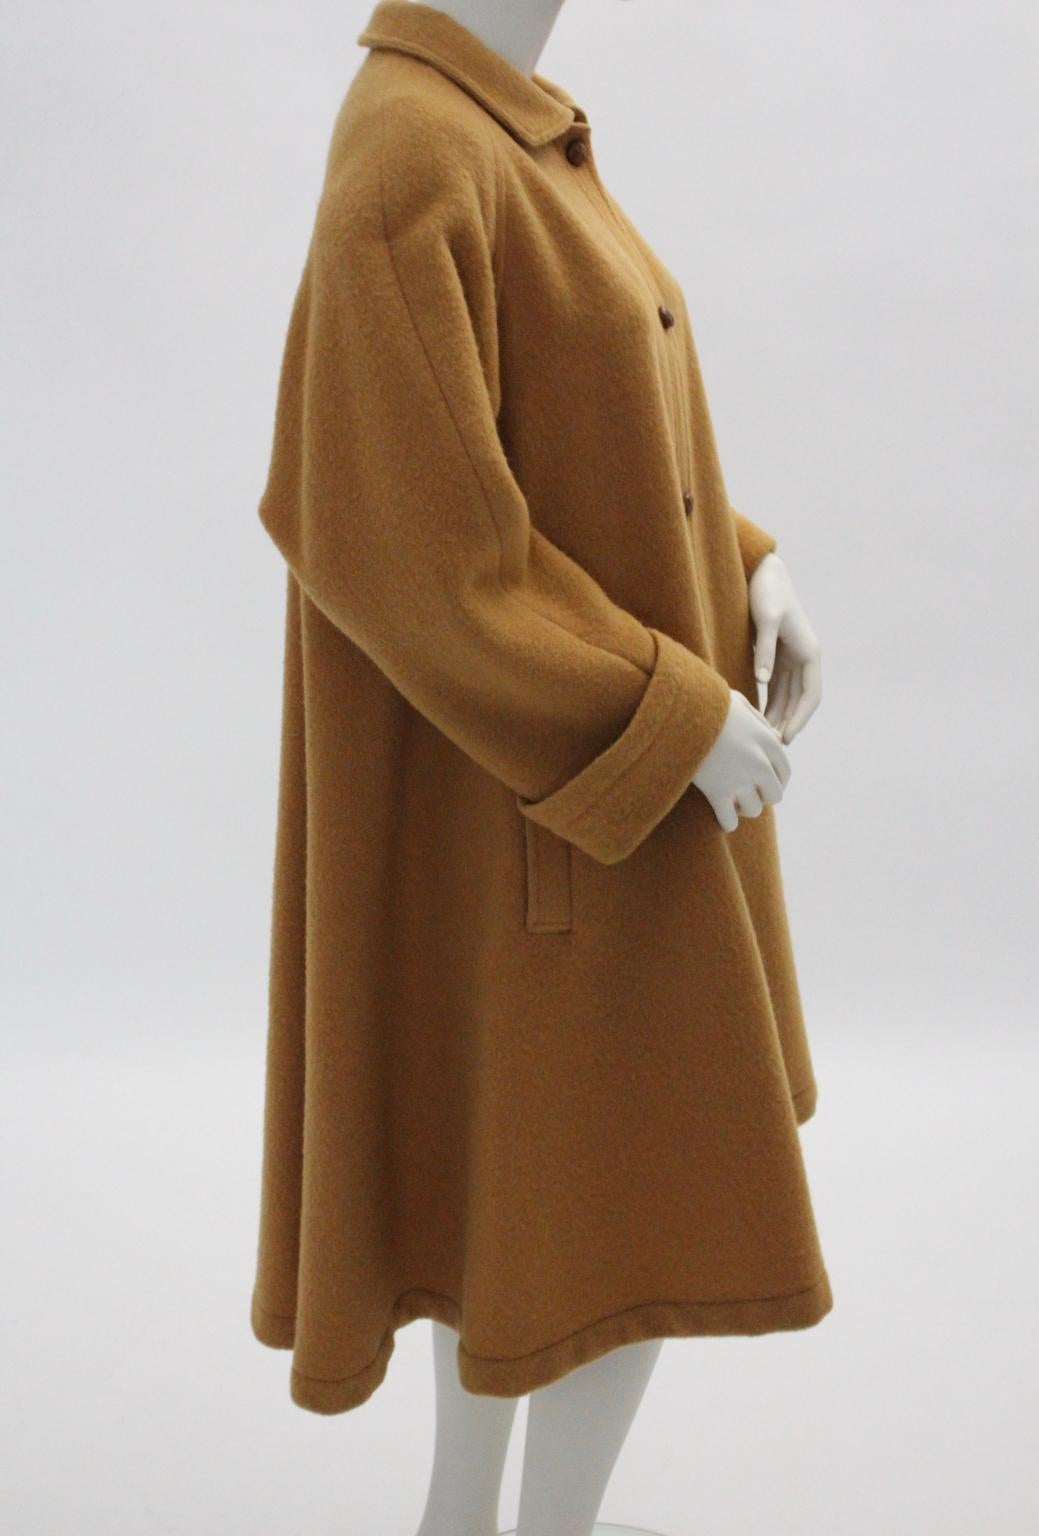 Guy Laroche Diffusion Paris Vintage Wool Coat 1970s In Good Condition For Sale In Vienna, AT